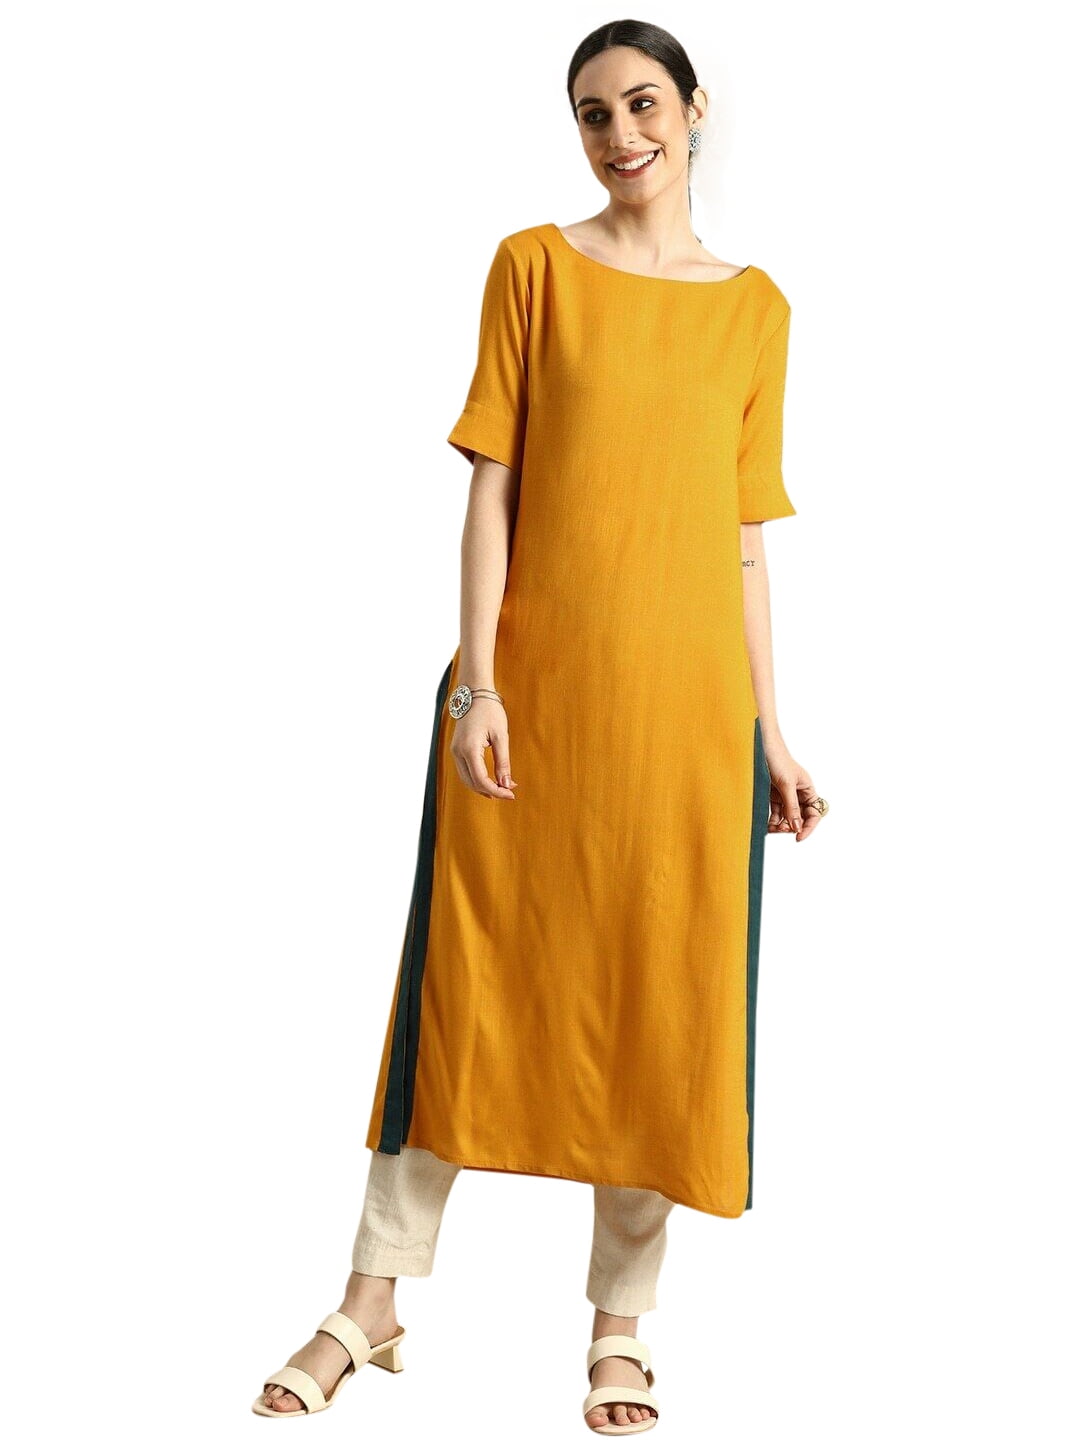 Boat Neck Kurti - Get Best Price from Manufacturers & Suppliers in India